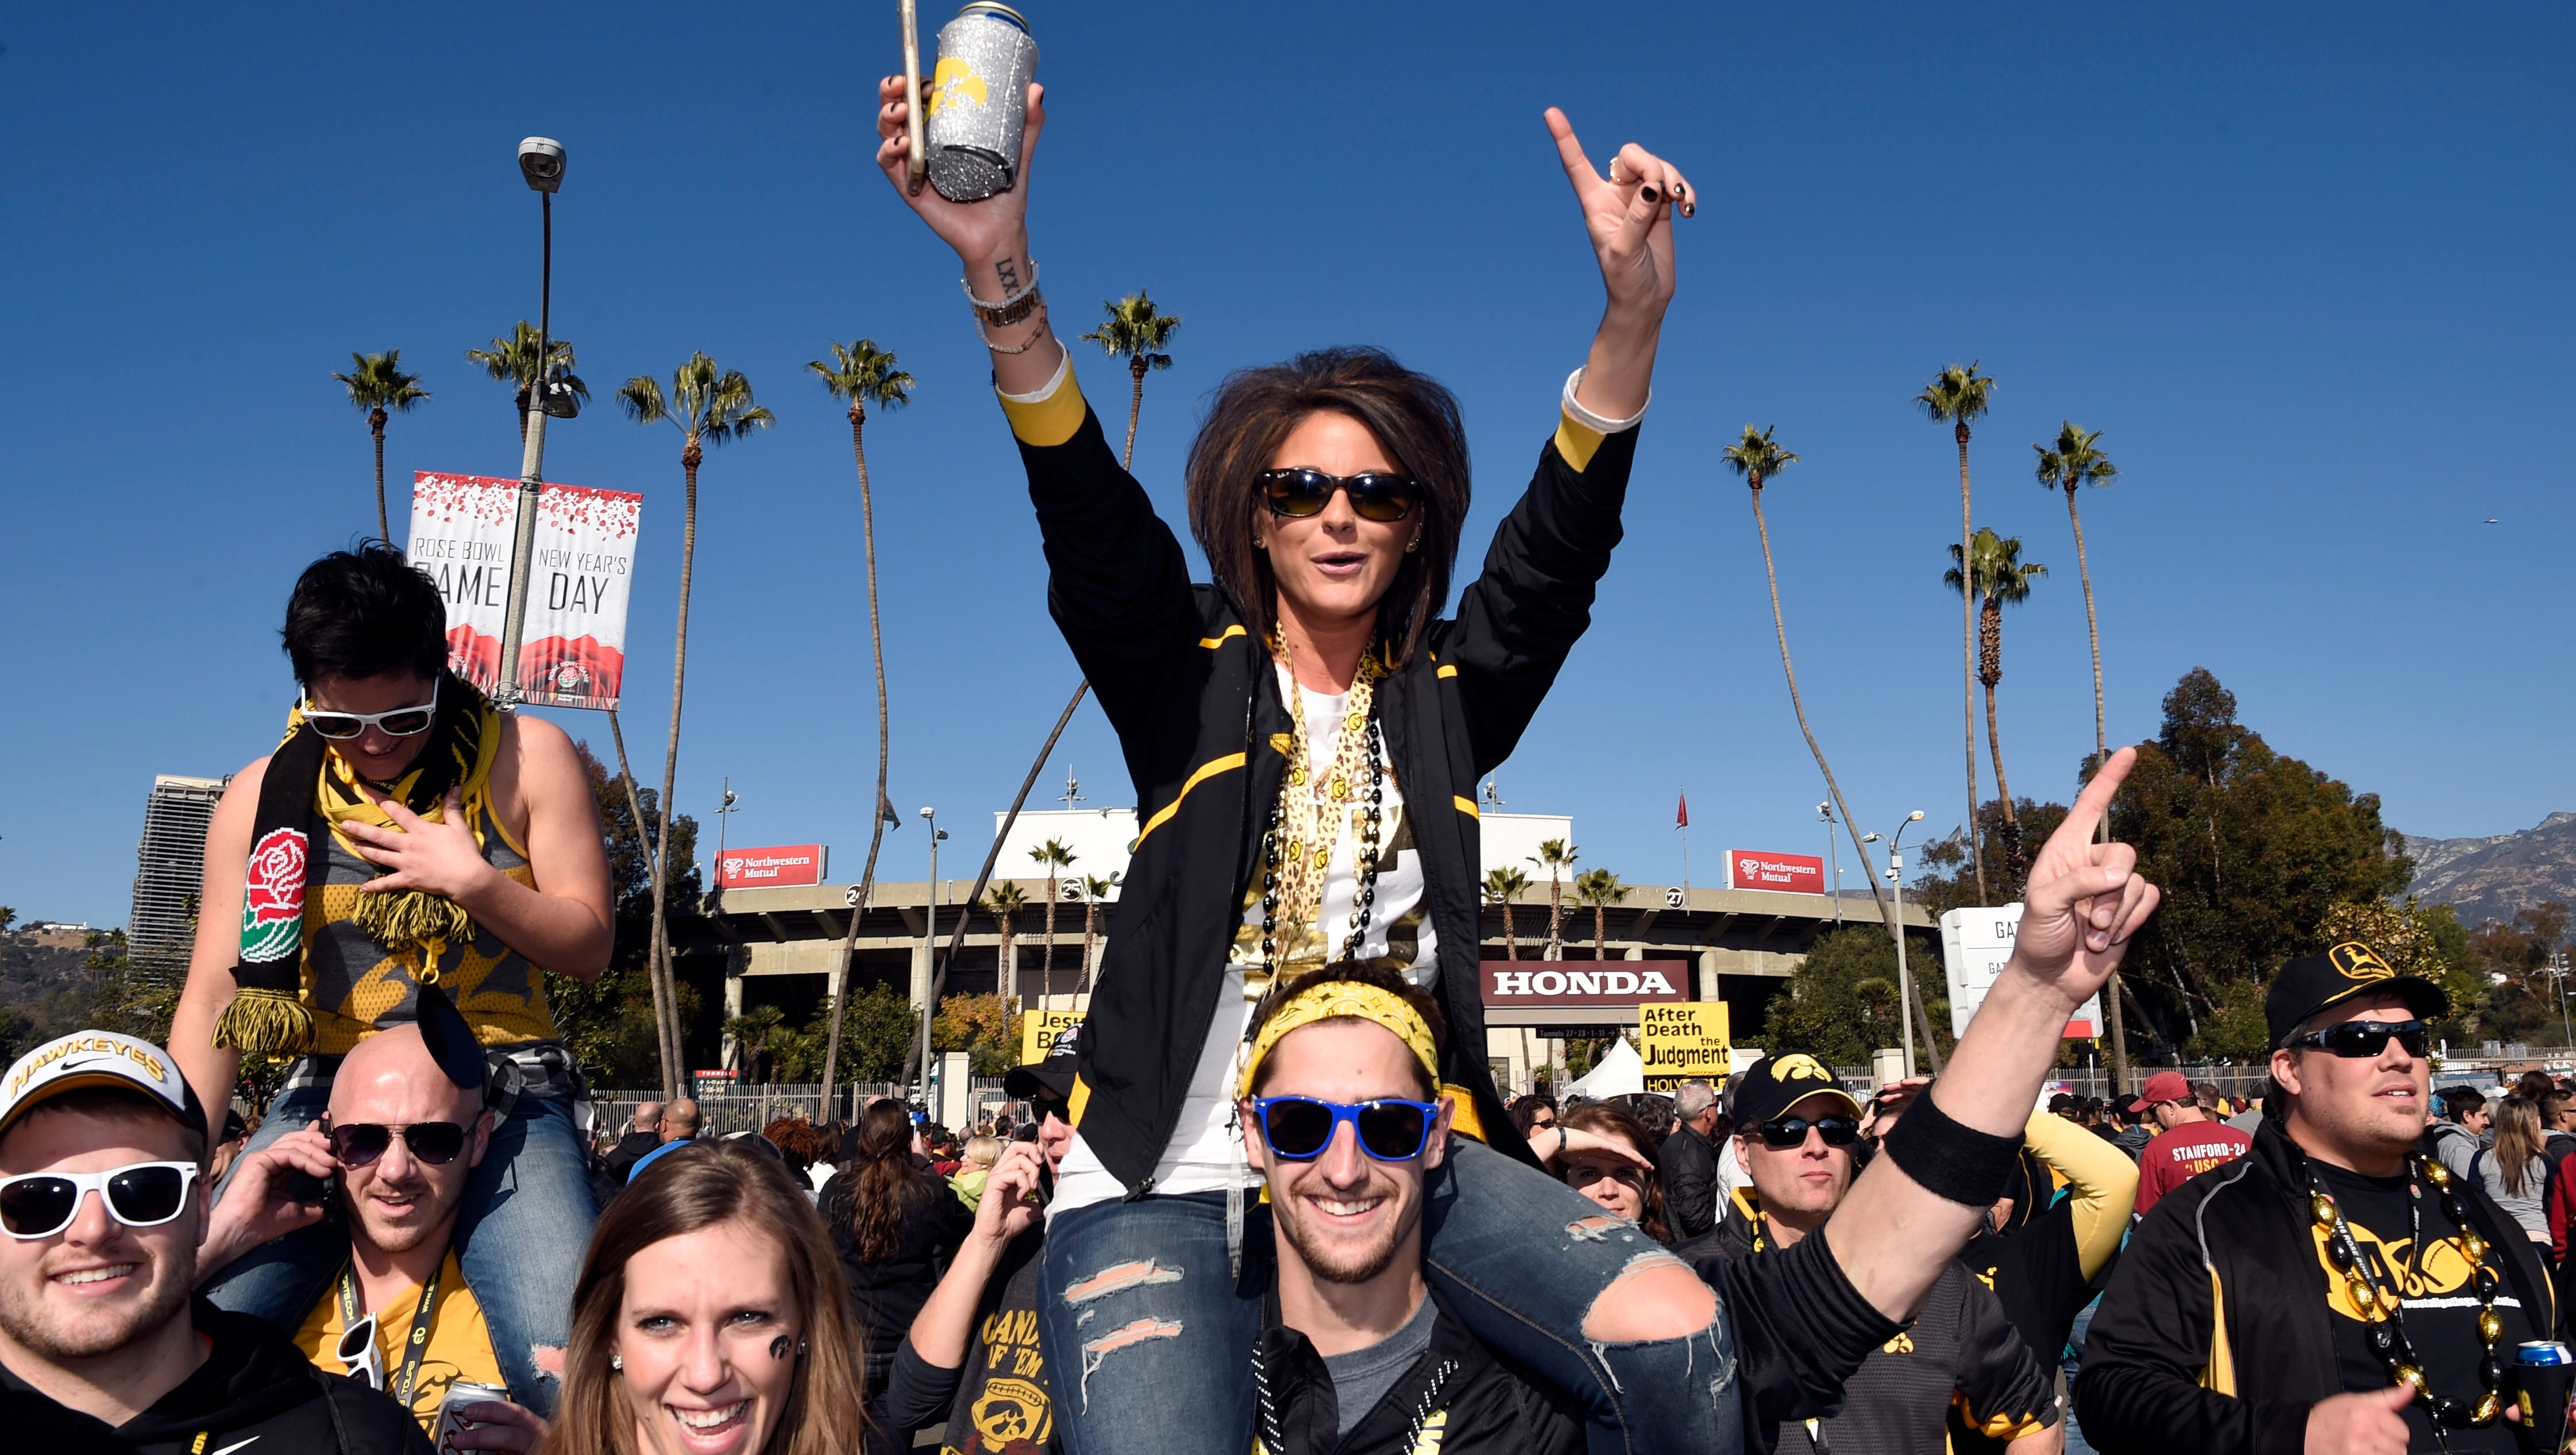 Iowa Hawkeyes fans tailgate before the game between the Iowa Hawkeyes and the Stanford Cardinal in the 2016 Rose Bowl at Rose Bowl.